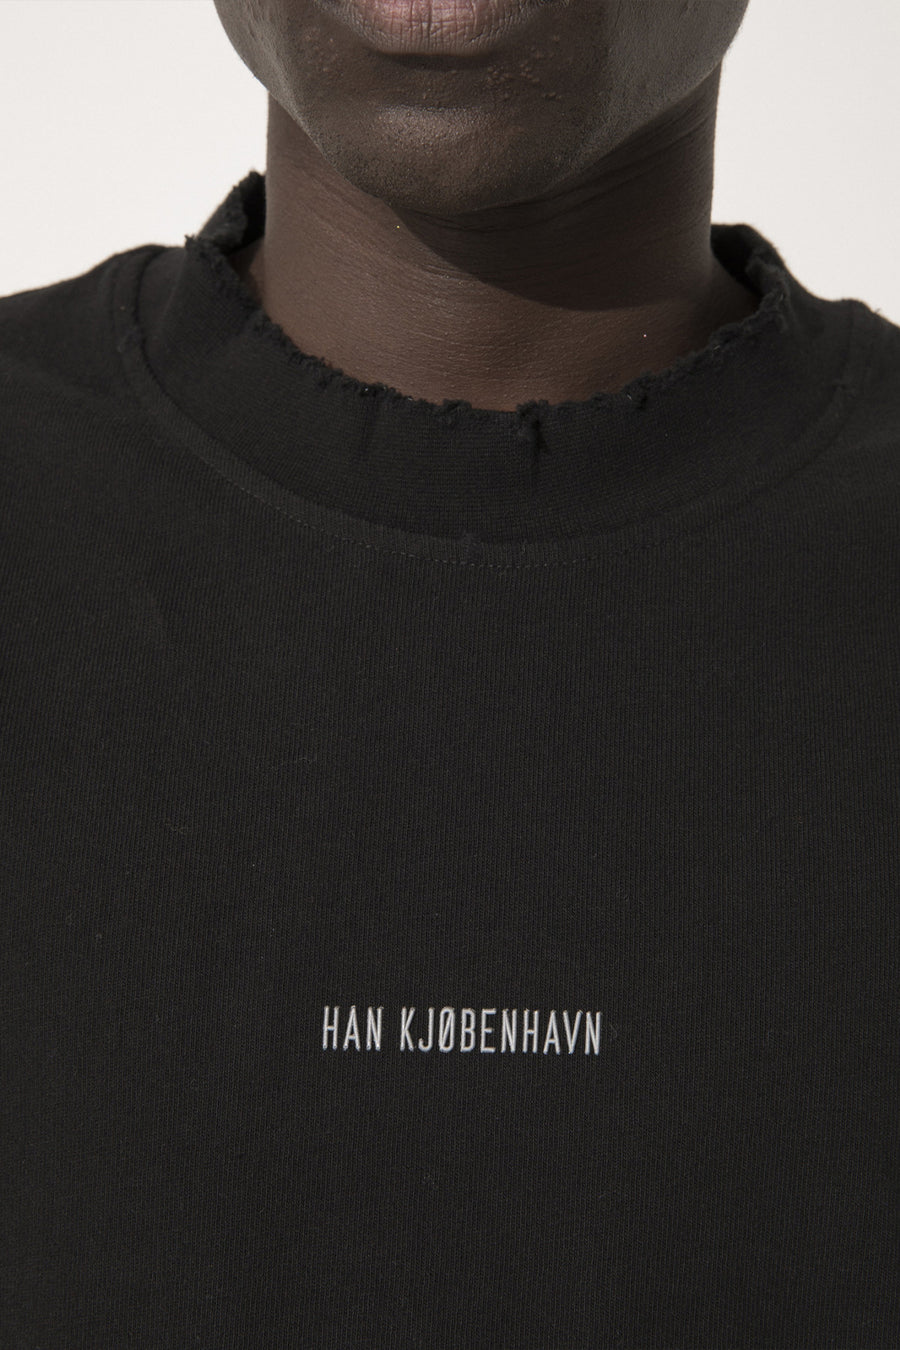 Buy the Han Kjobenhavn Distressed Logo T-Shirt in Black at Intro. Spend £50 for free UK delivery. Official stockists. We ship worldwide.